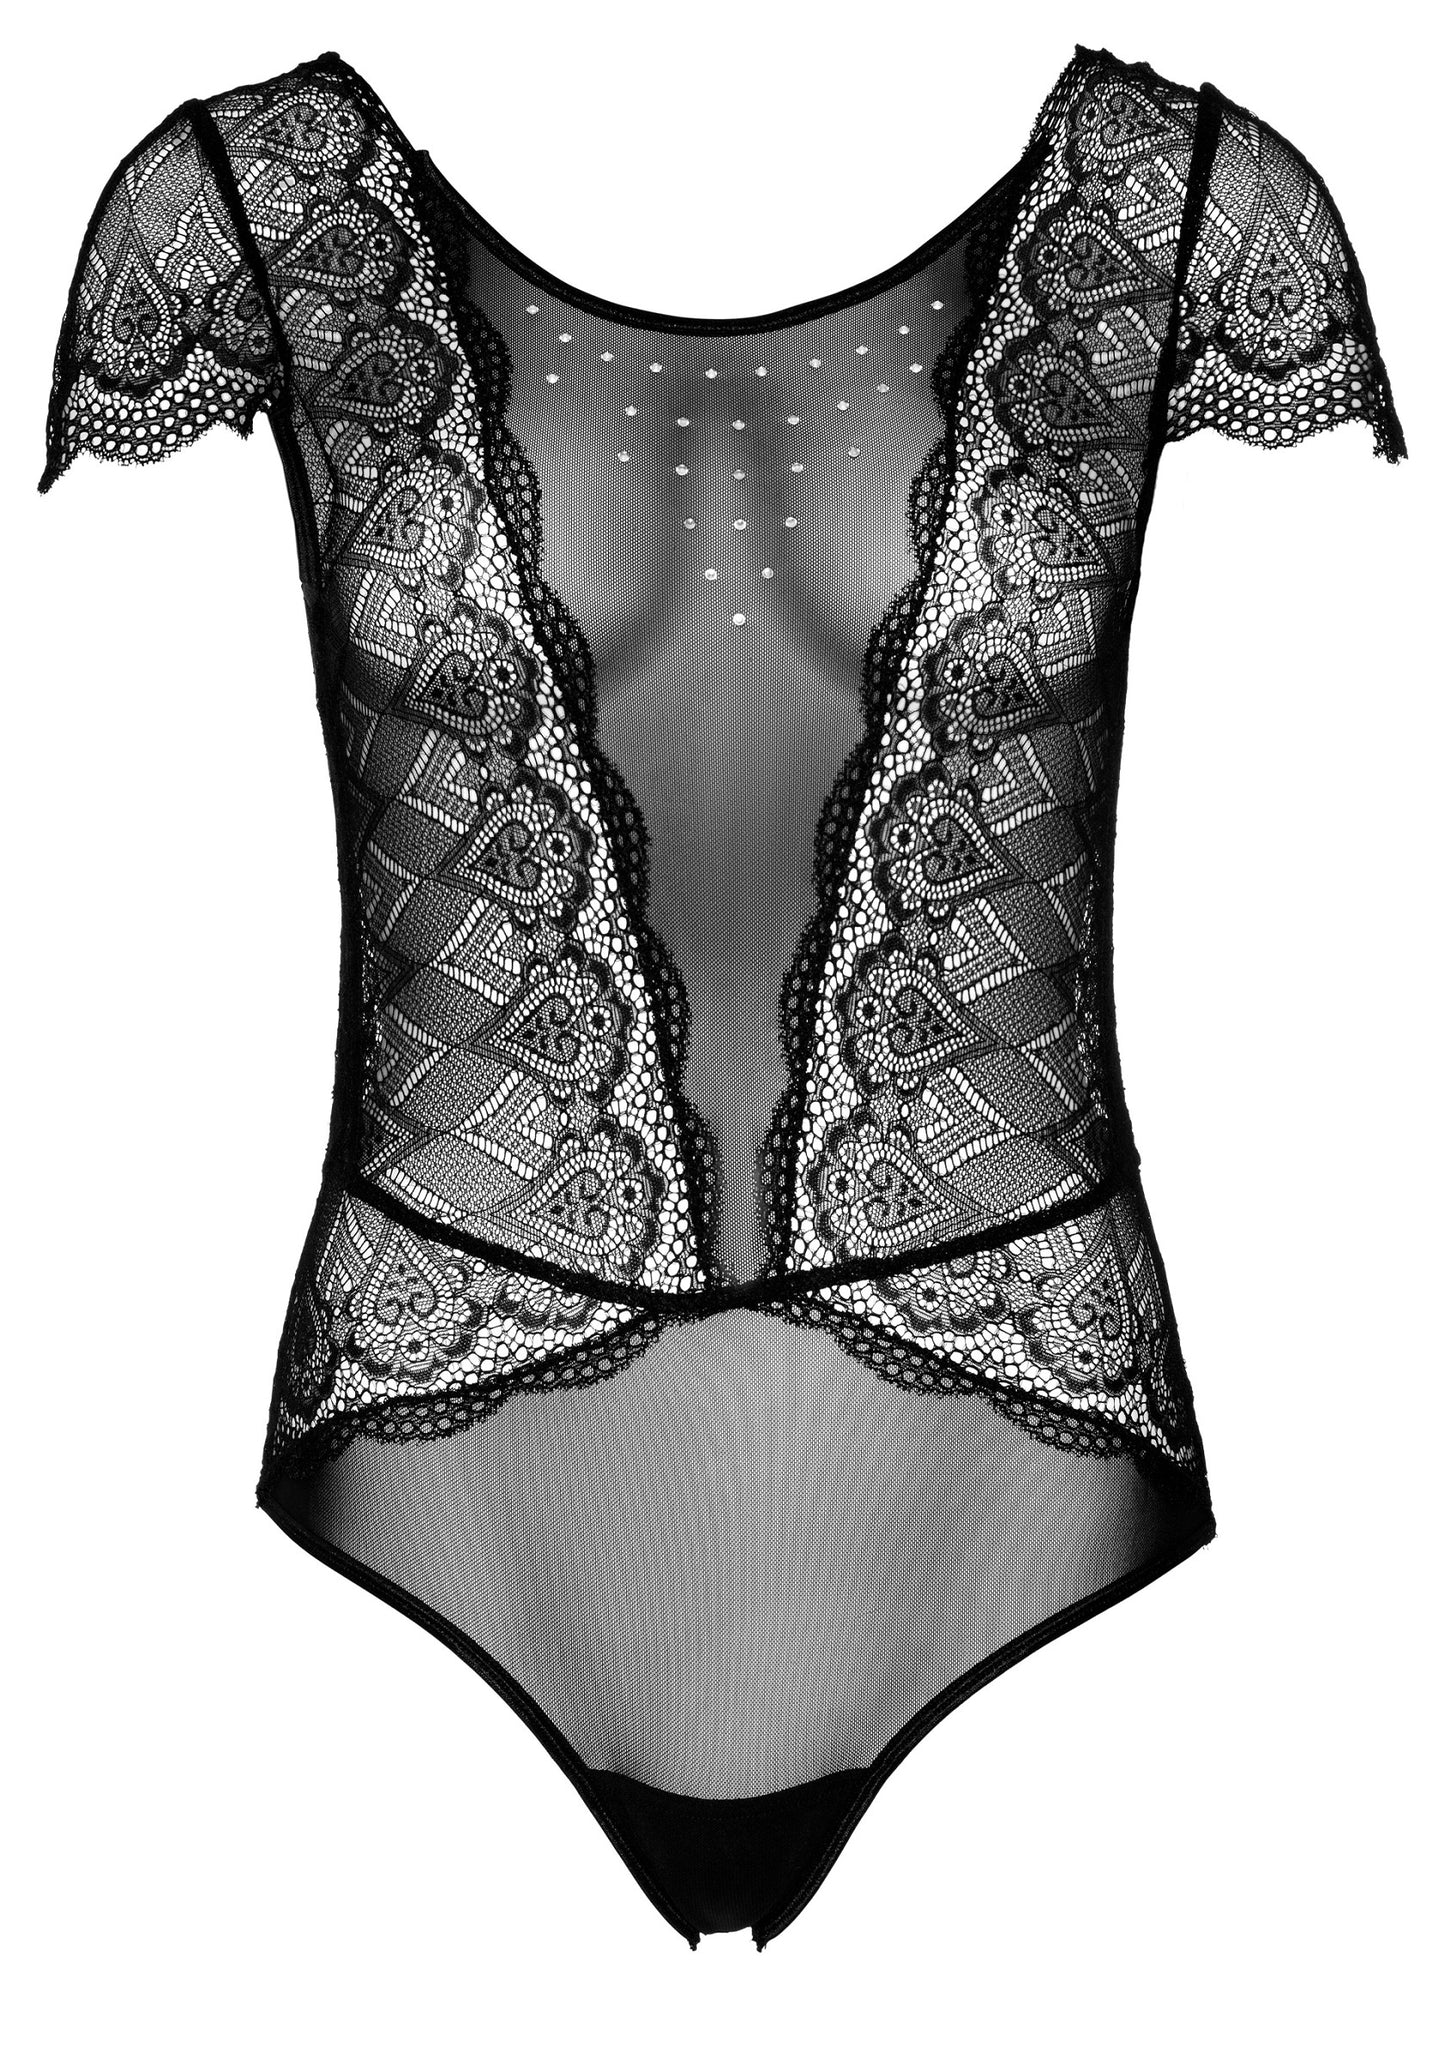 Daring Intimates Floral Lace and Mesh Teddy BLACK S/M - 1